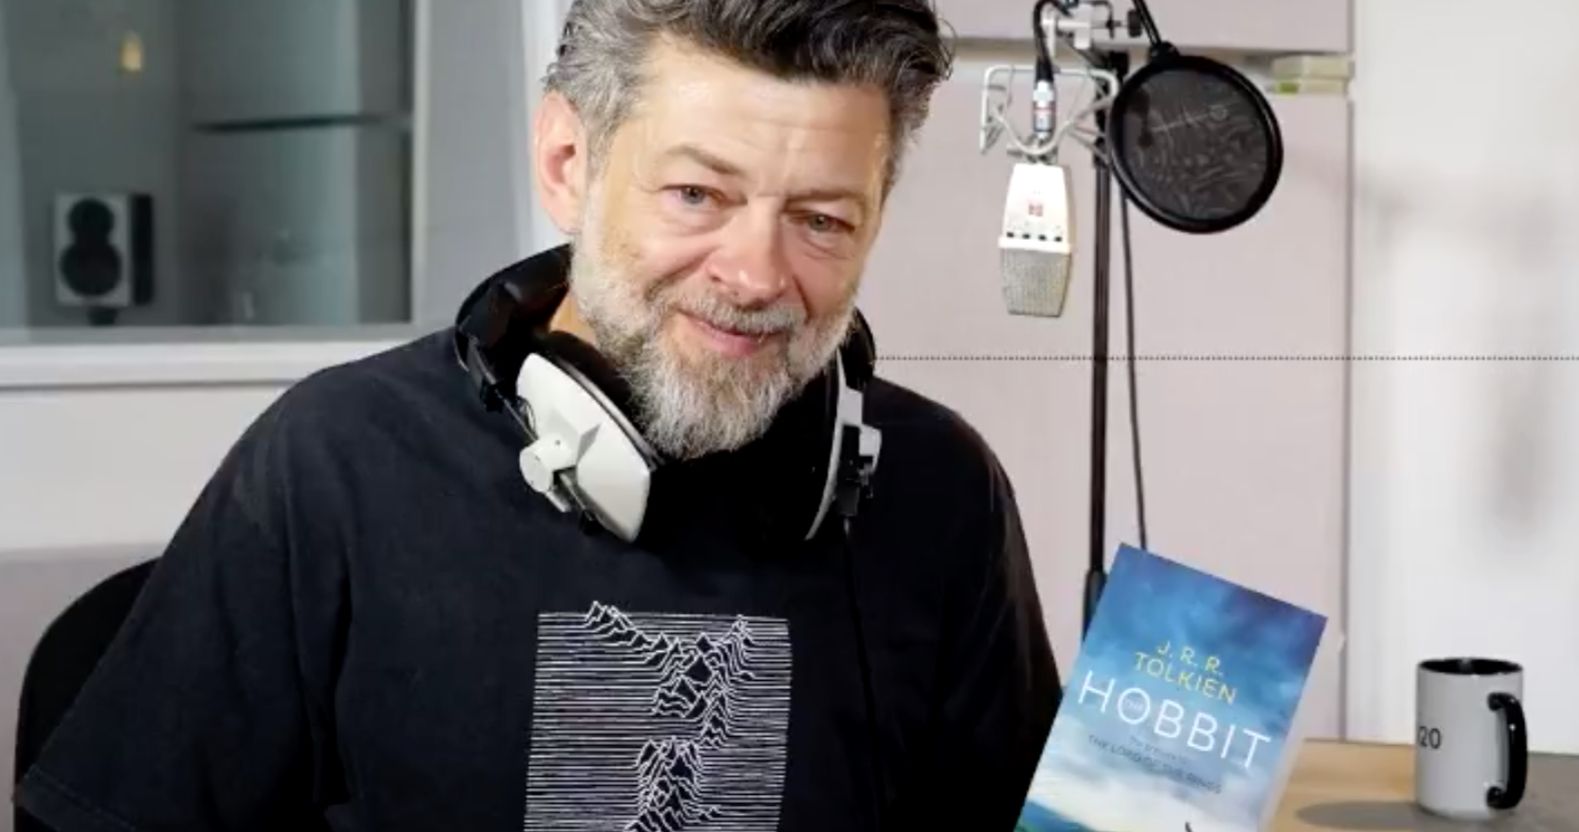 Andy Serkis Narrates The Hobbit Audiobook in First Clip from Fall Release